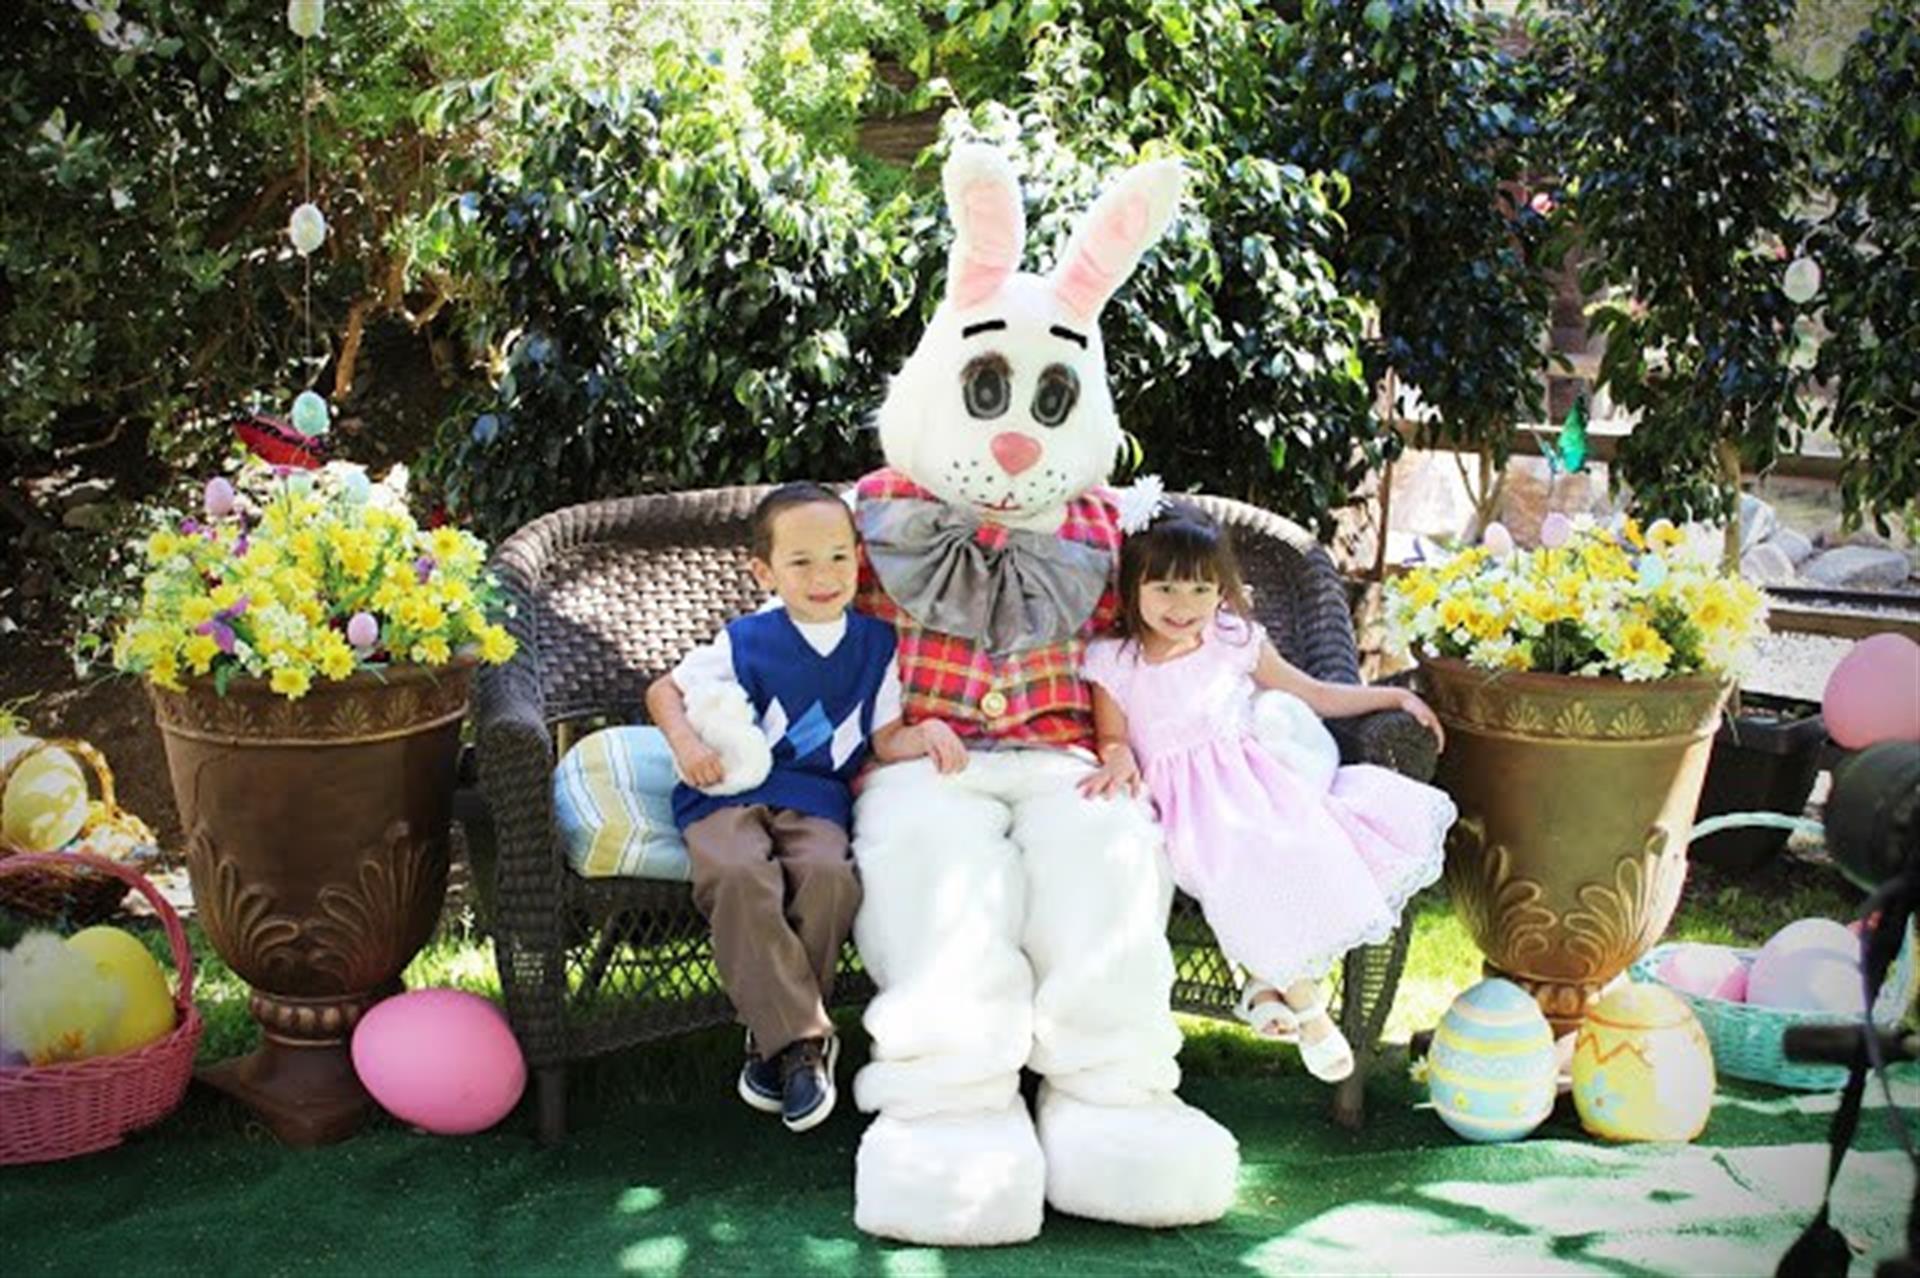 Meet the Easter Bunny at Fashion Island